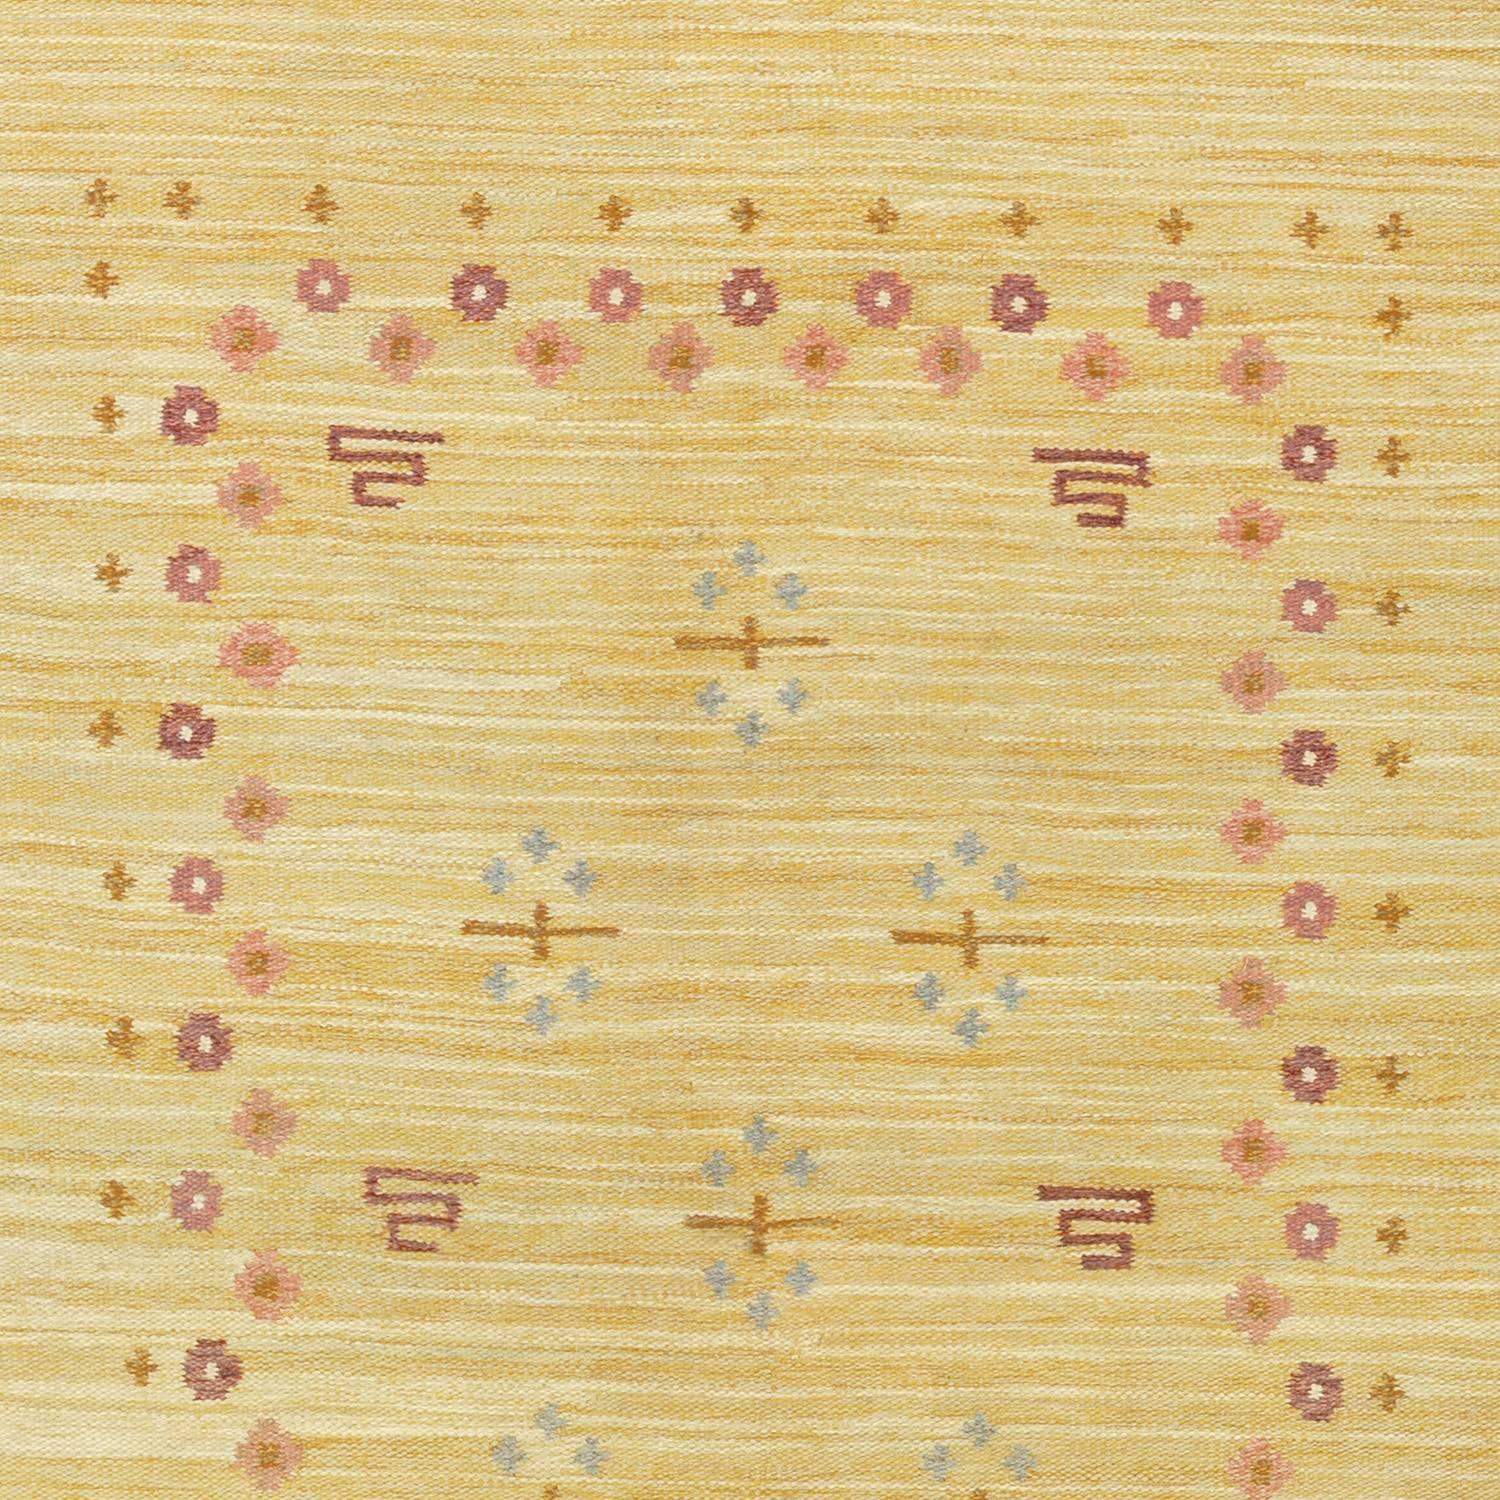 20th Century Swedish Flat-Weave Carpet by Solveig Westerberg In Excellent Condition For Sale In New York, NY